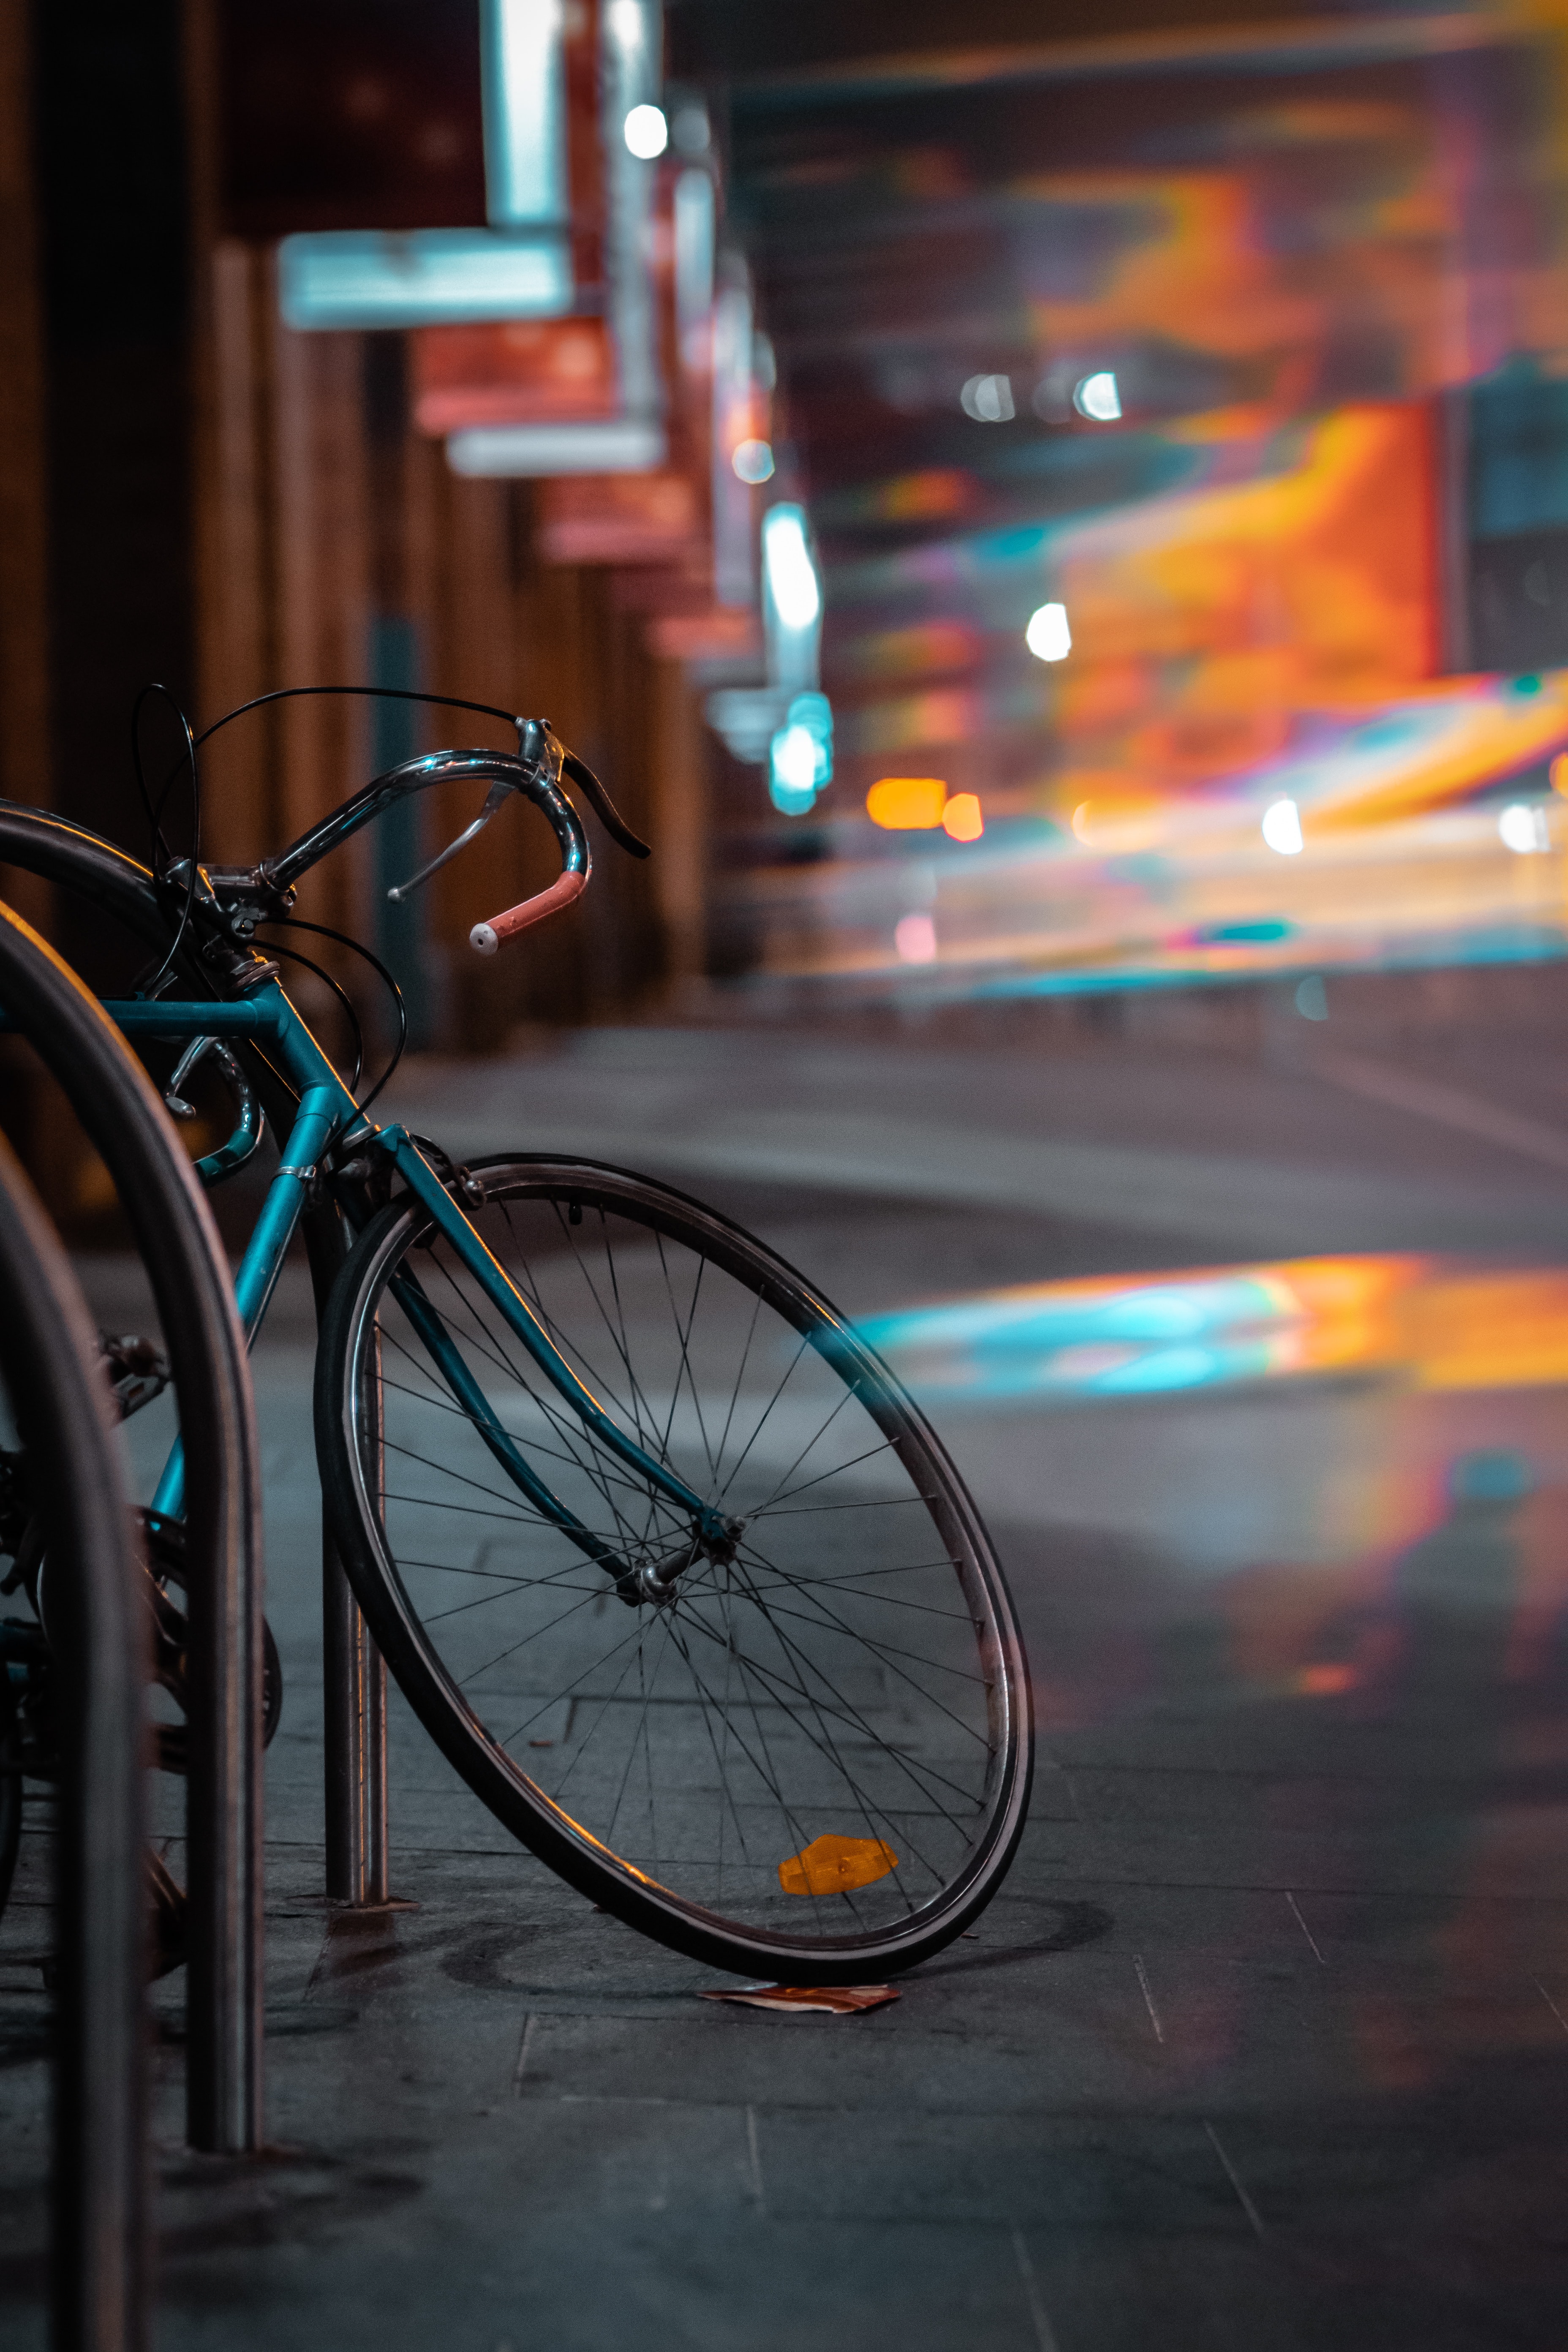 blur, miscellaneous, bicycle, transport, glare, miscellanea, smooth, evening, wheels phone background